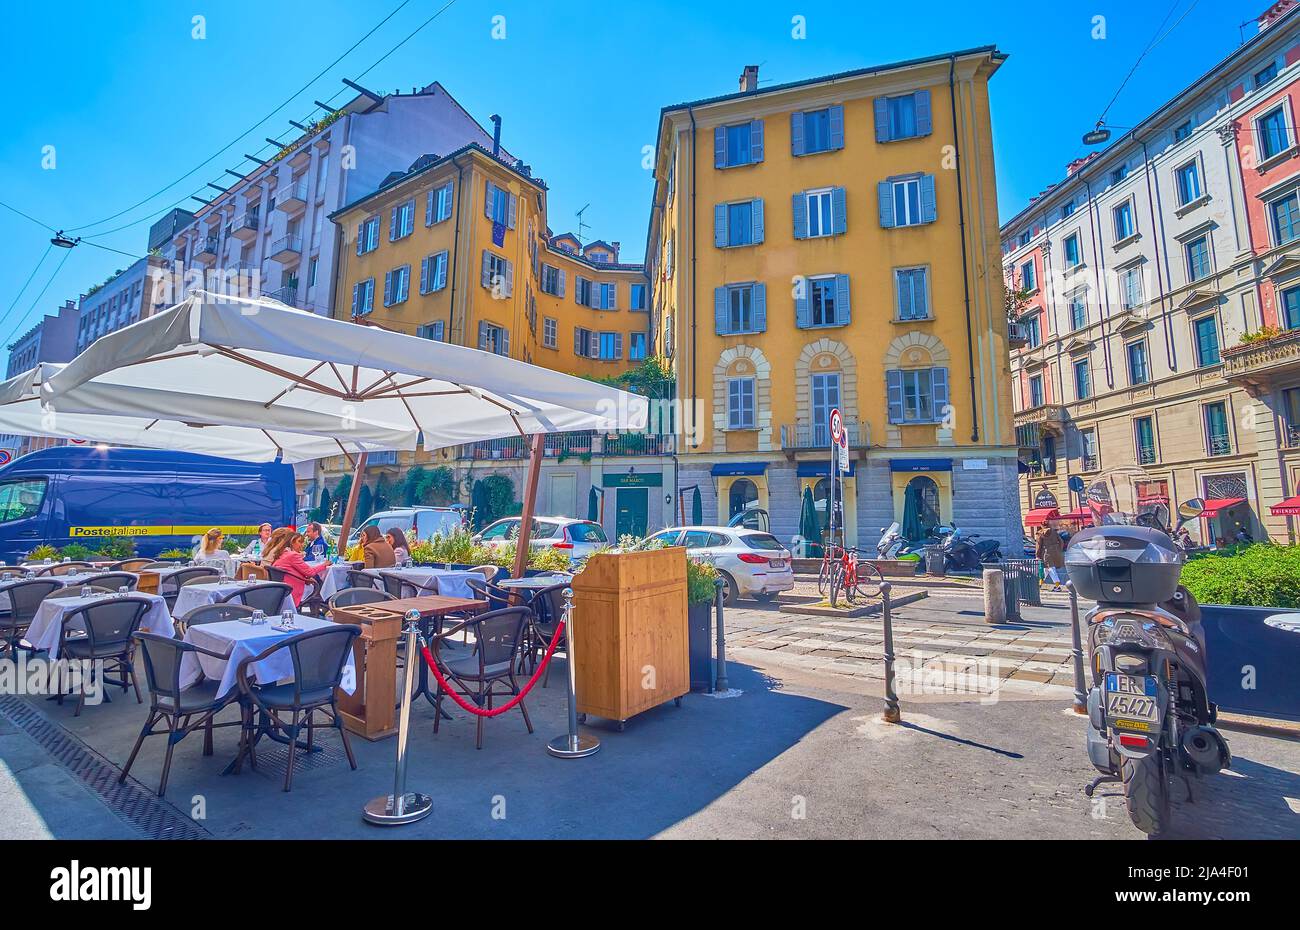 MILAN, ITALY - APRIL 5, 2022: Brera district is famous for its numerous outdoor restaurants in noisy streets, on April 5 in Milan, Italy Stock Photo